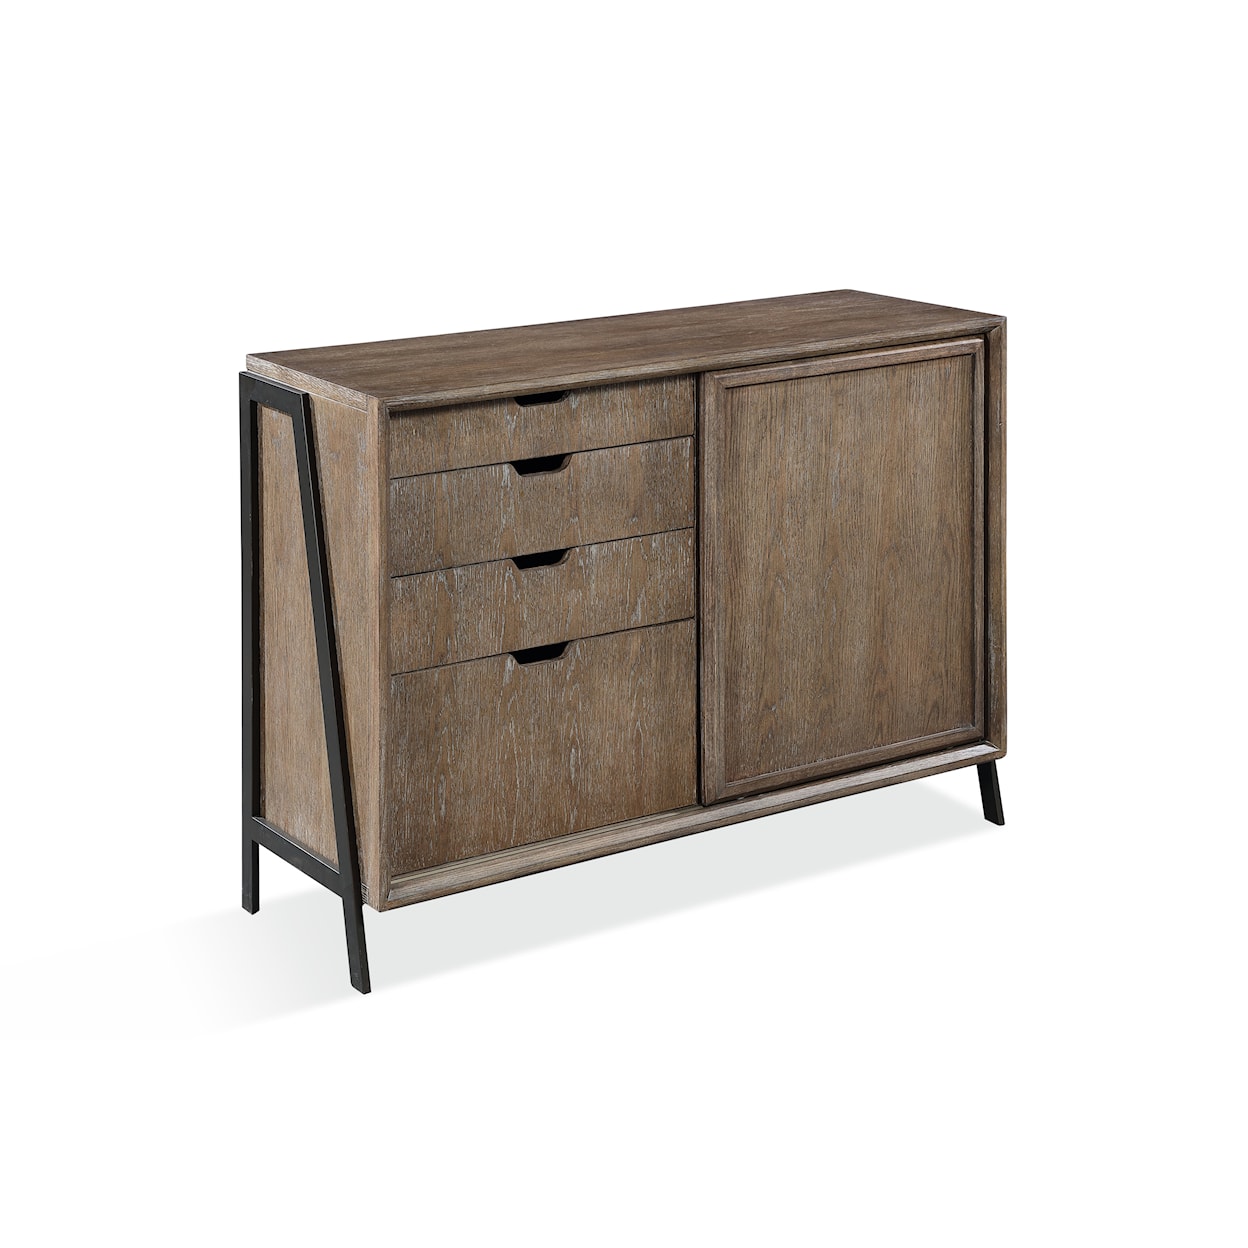 Modus International Finch Wood and Metal Credenza